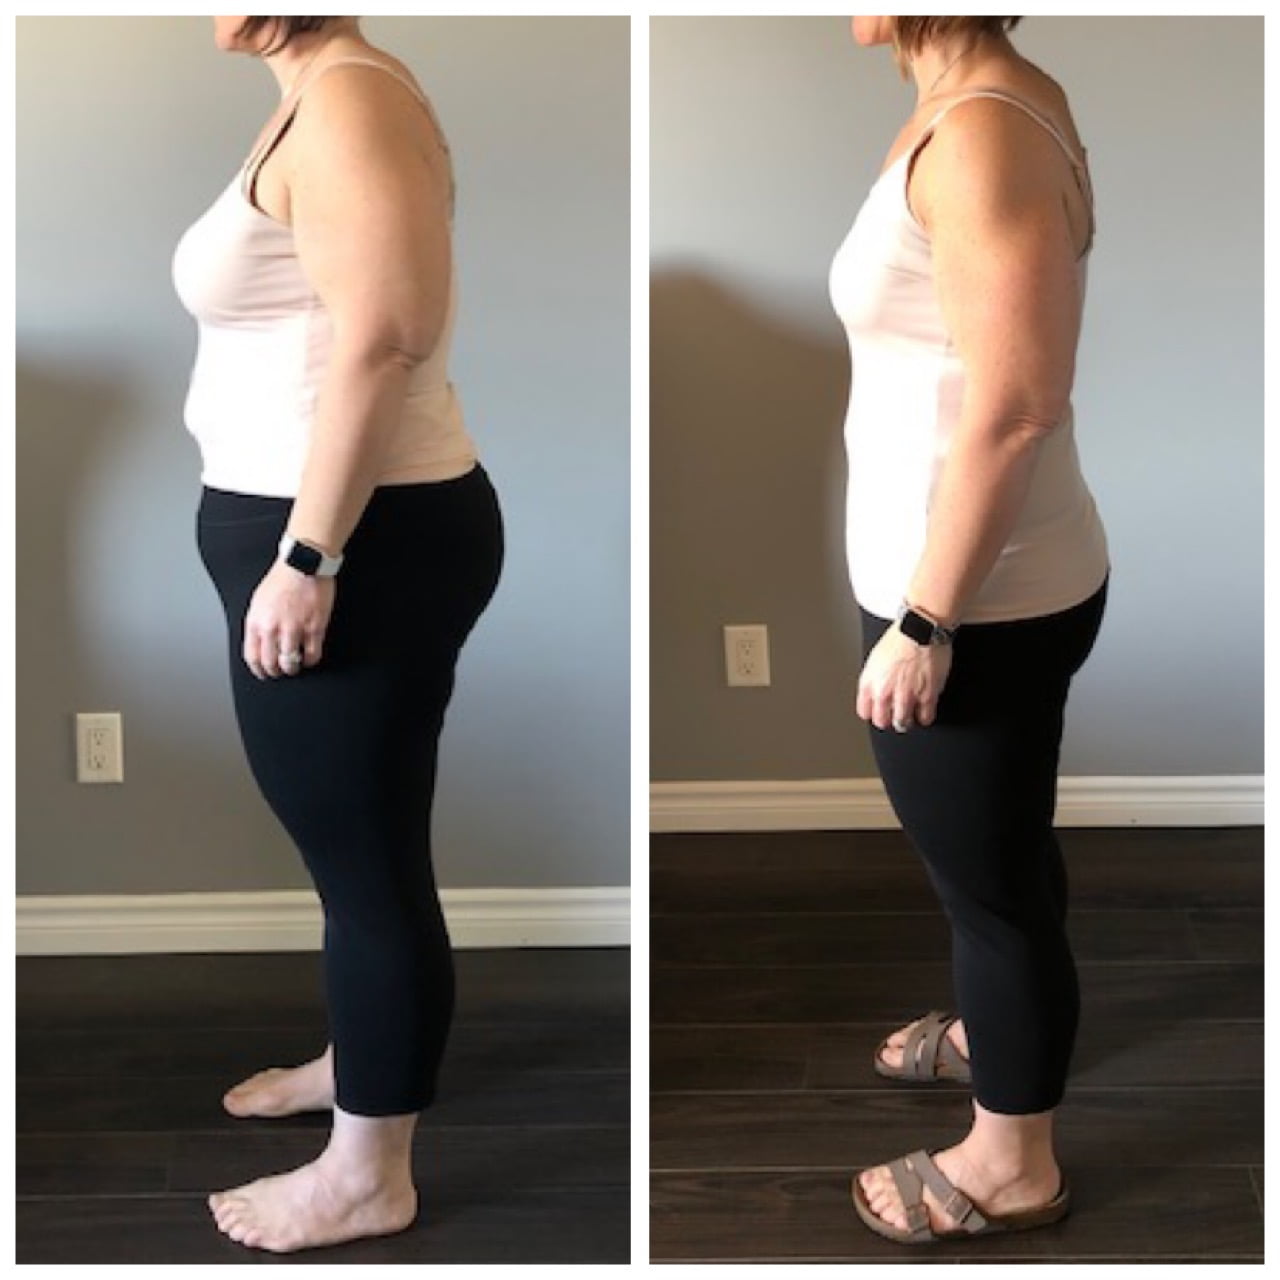 Mandy lost 50lbs with MacroNutrition